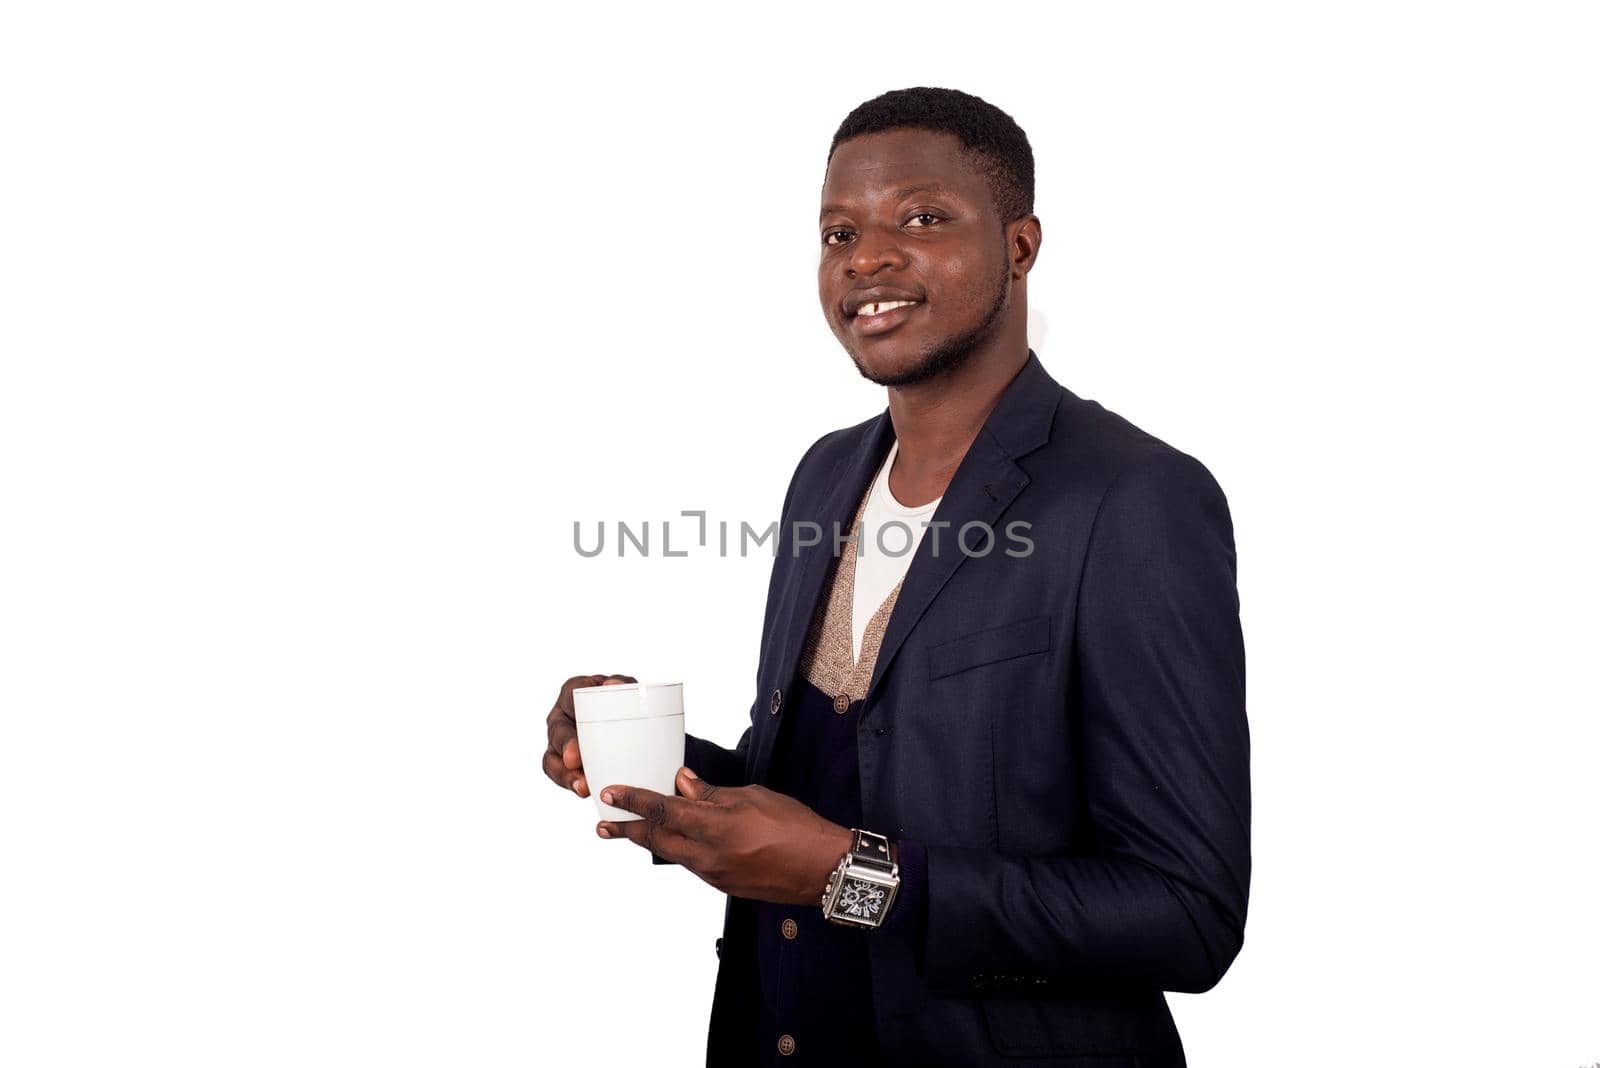 young man standing on white background in jacket holding cup in hand watching the camera smiling.